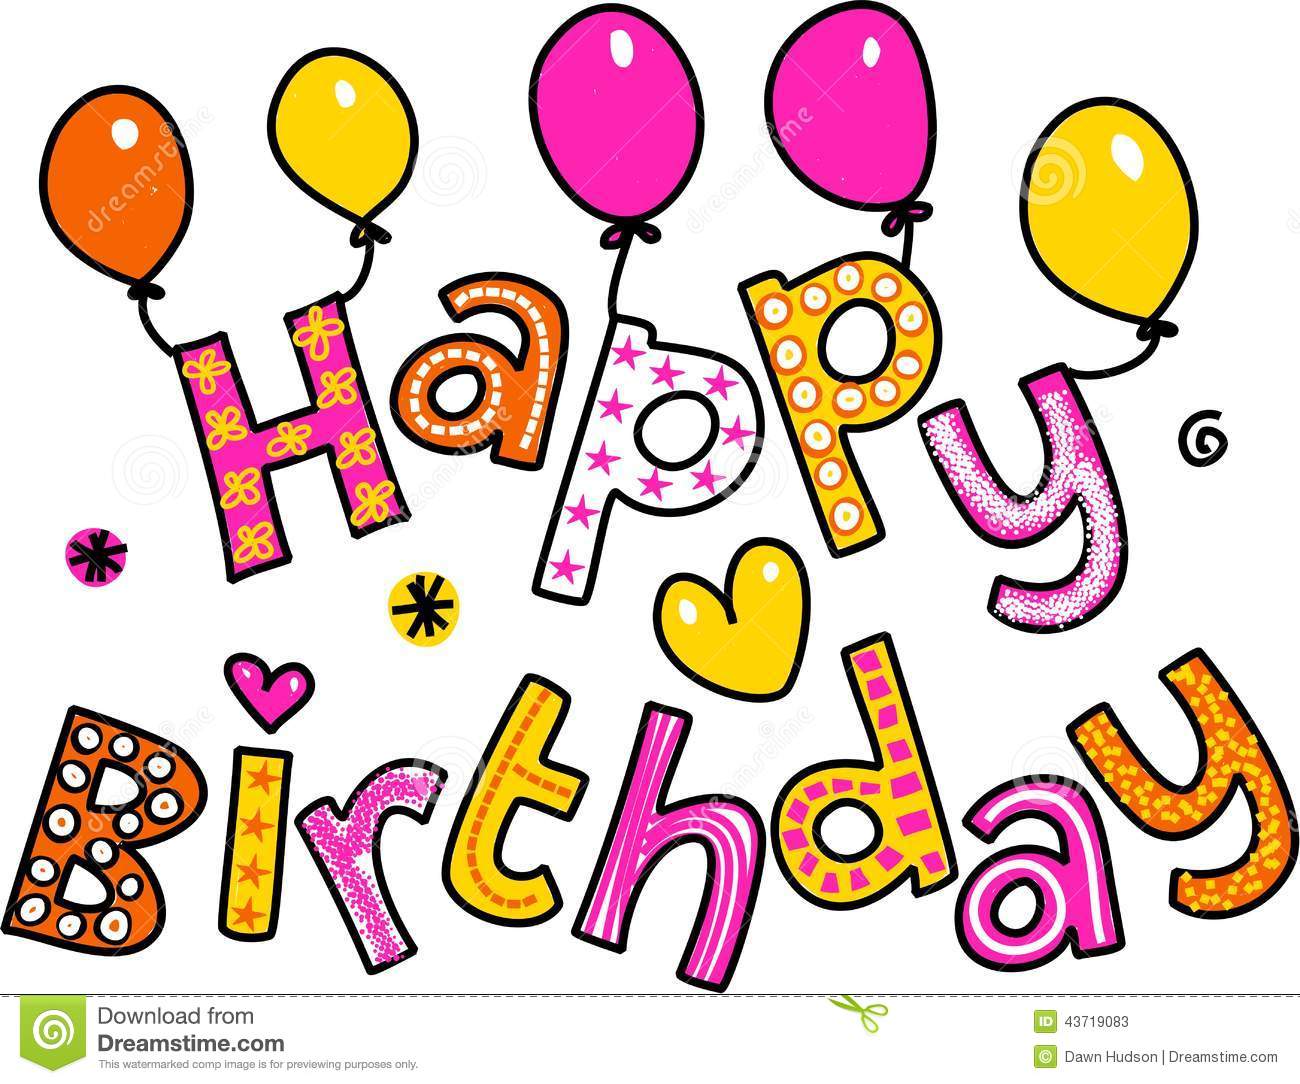 Birthday clipart stock images image